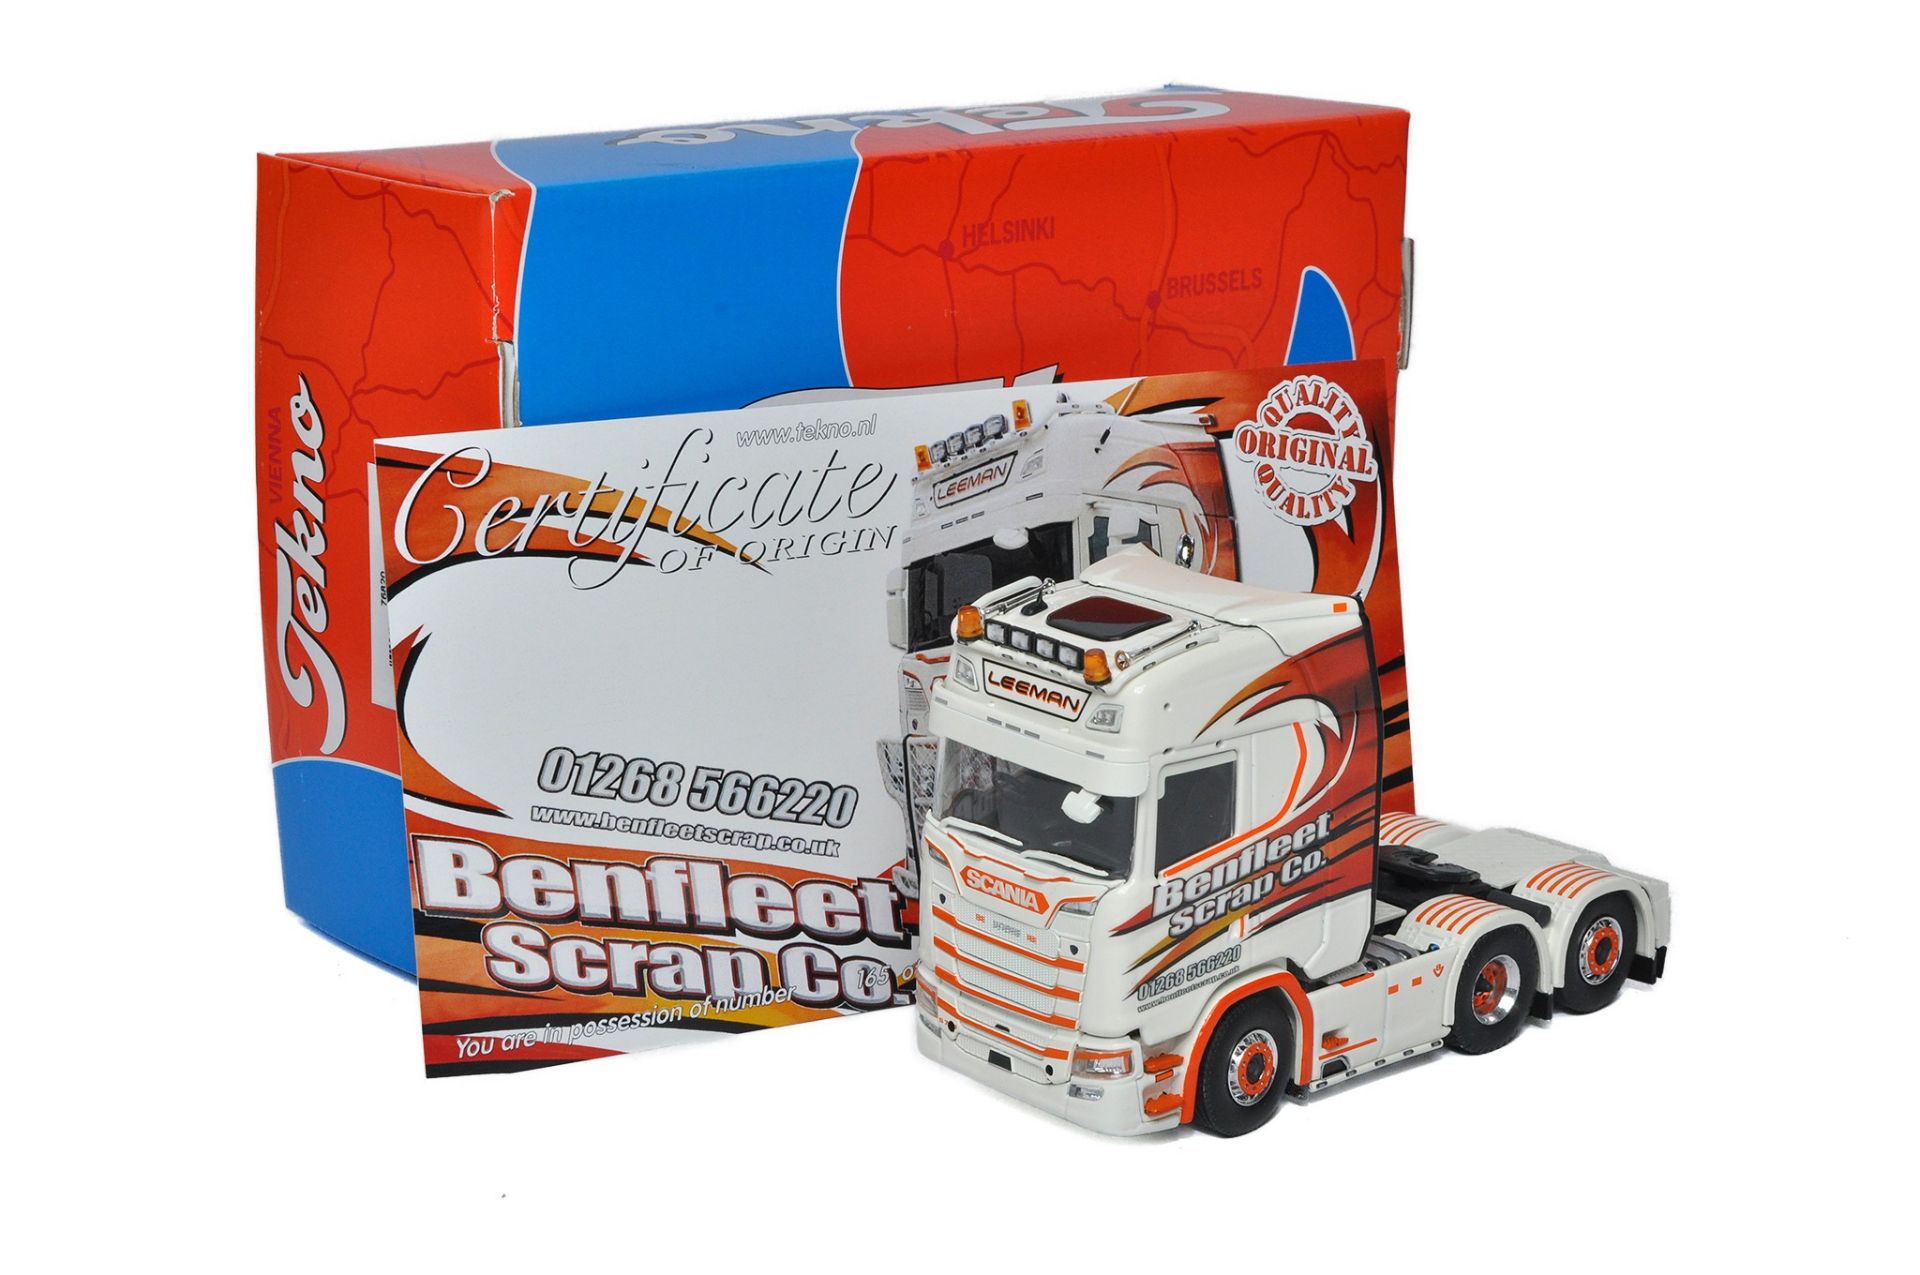 Tekno 1/50 diecast model truck issue comprising Scania in the livery of Benfleet Scrap Co. Limited